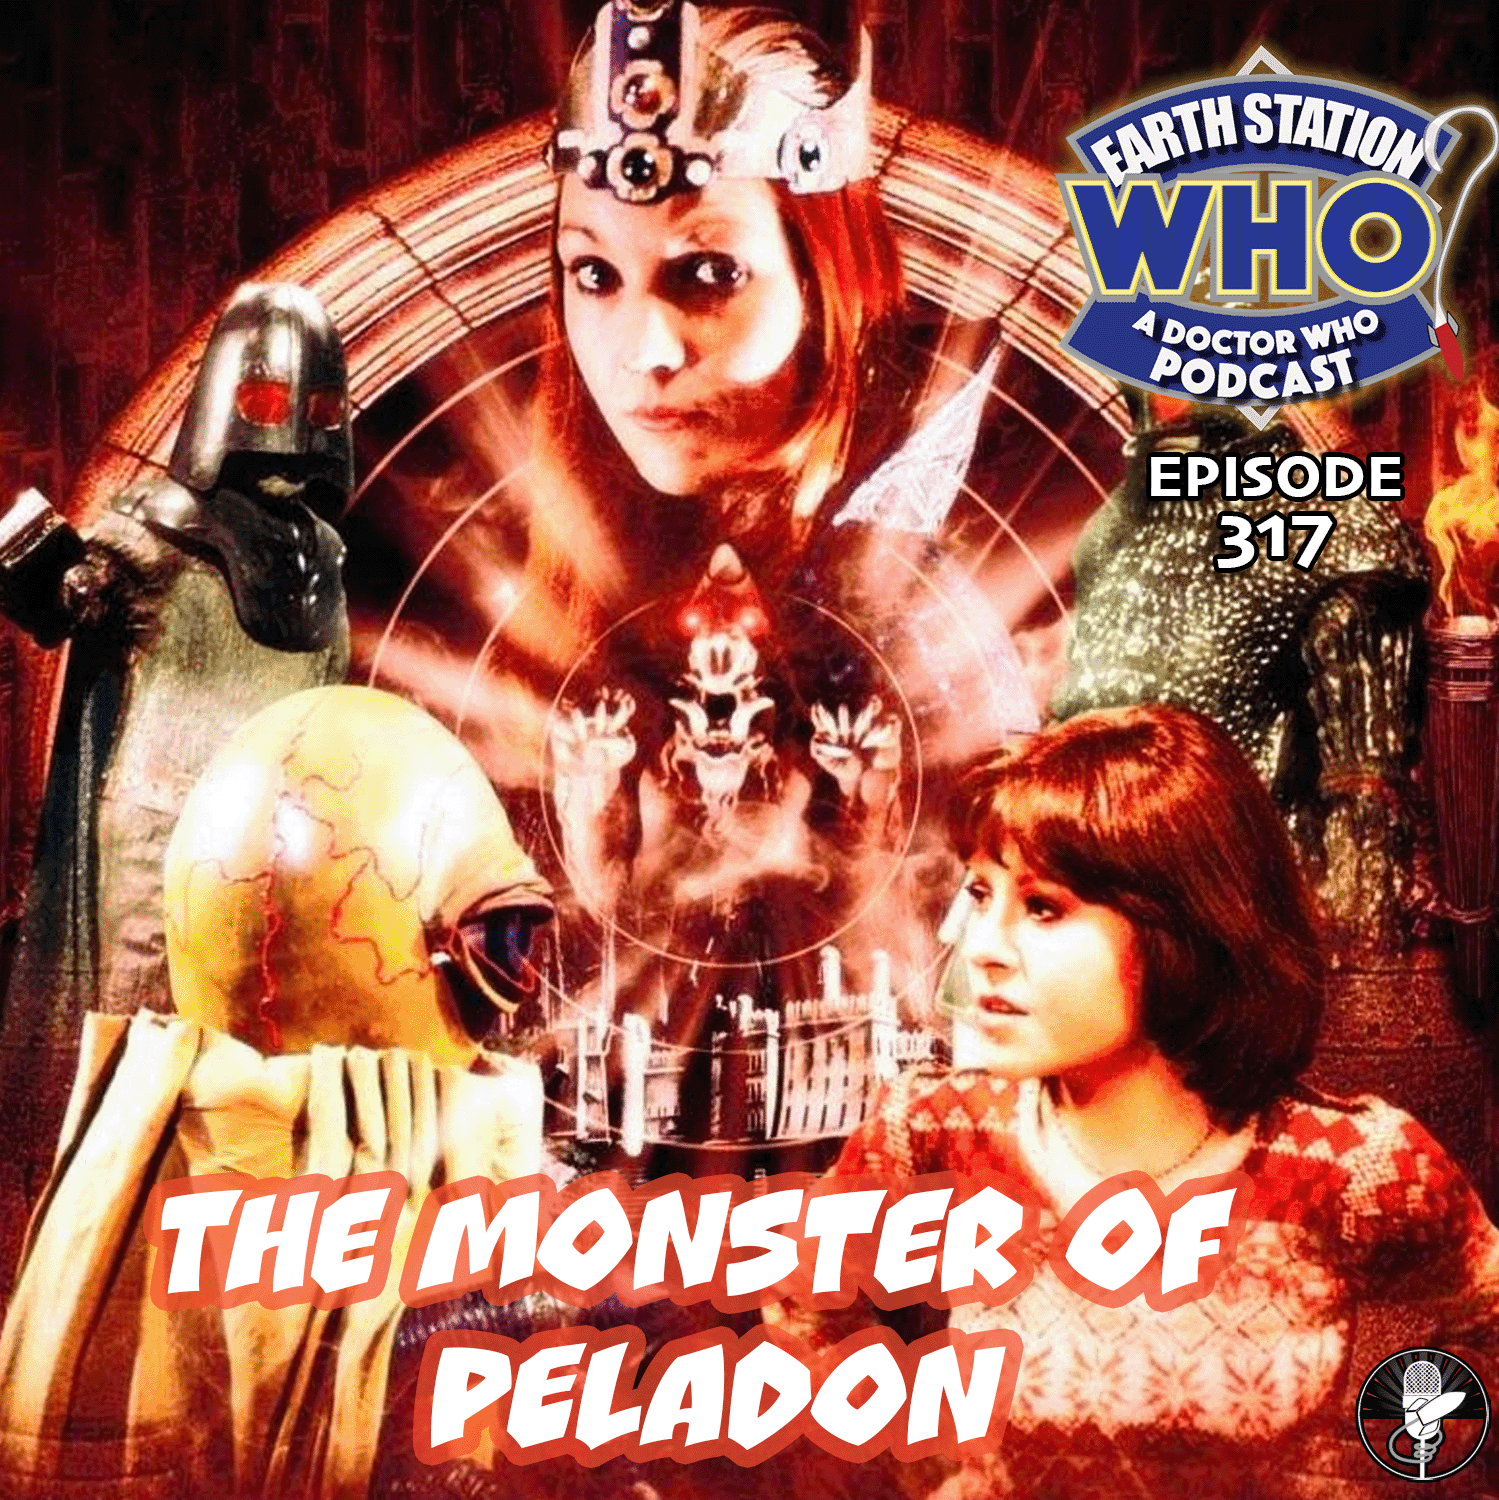 Earth Station Who Ep 317 - The Monster of Peladon